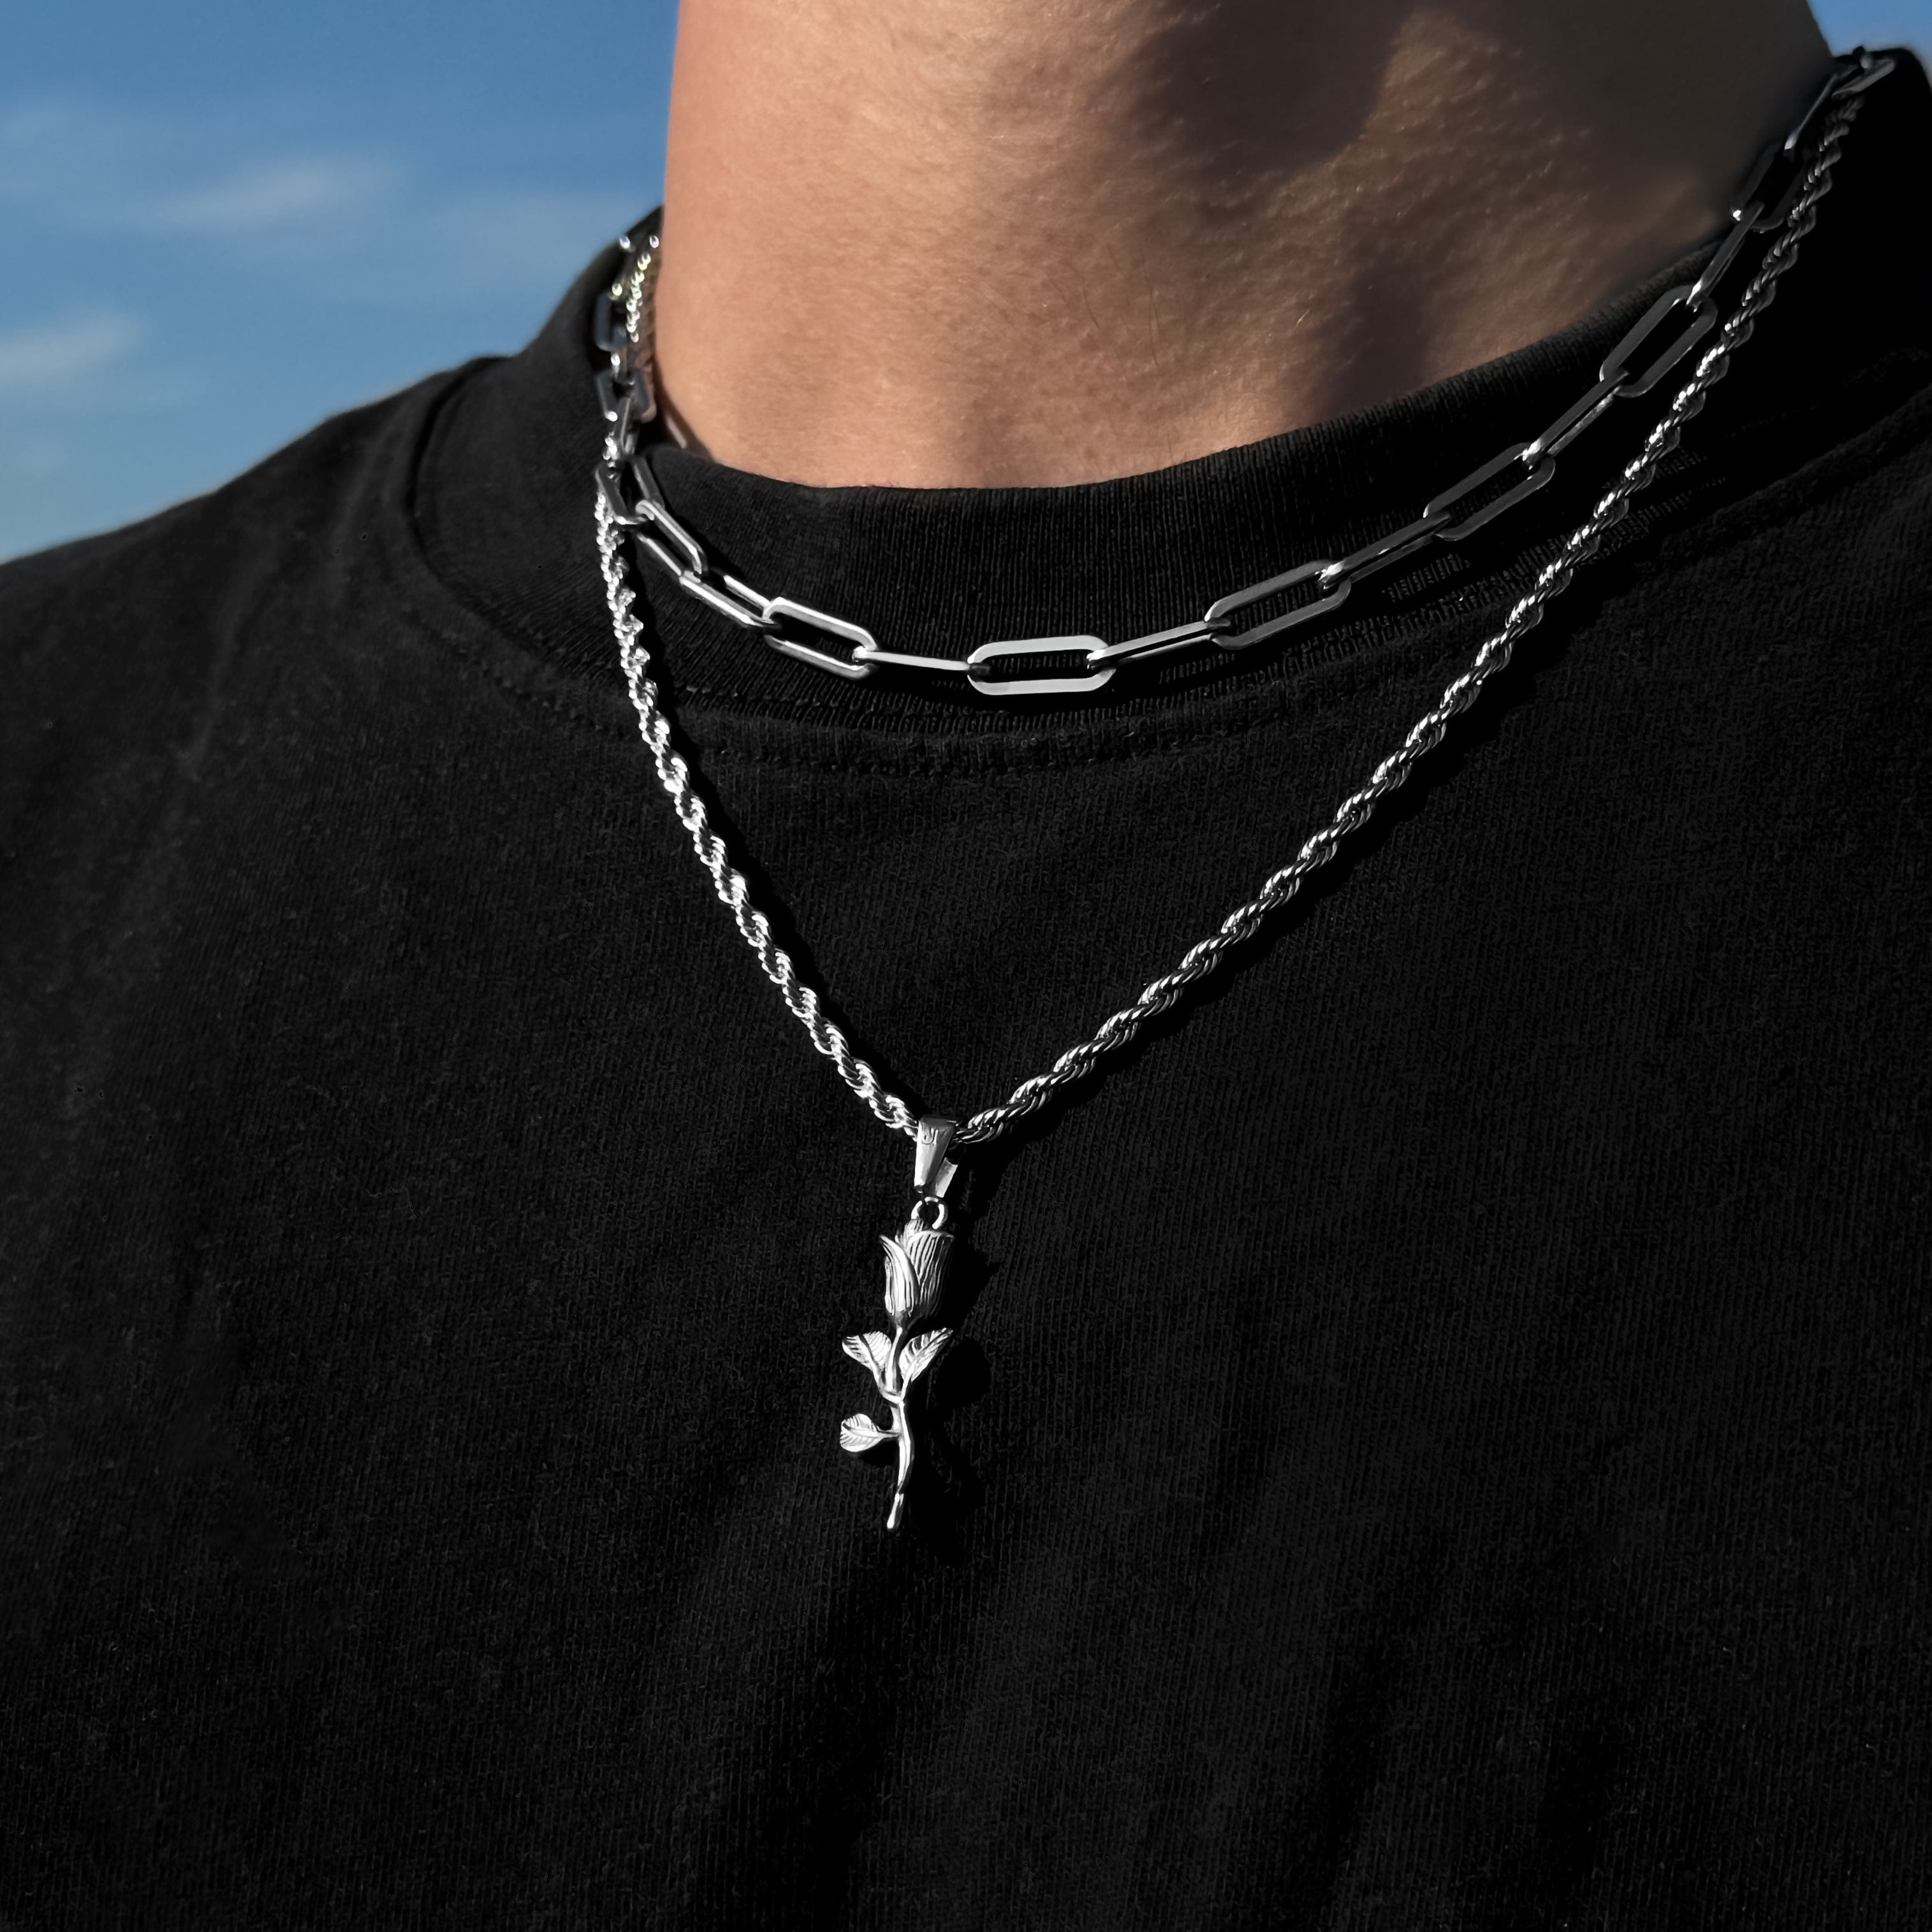 Chain with Pendant Rose Rope Chain - Silver (3mm) - JVillion® 